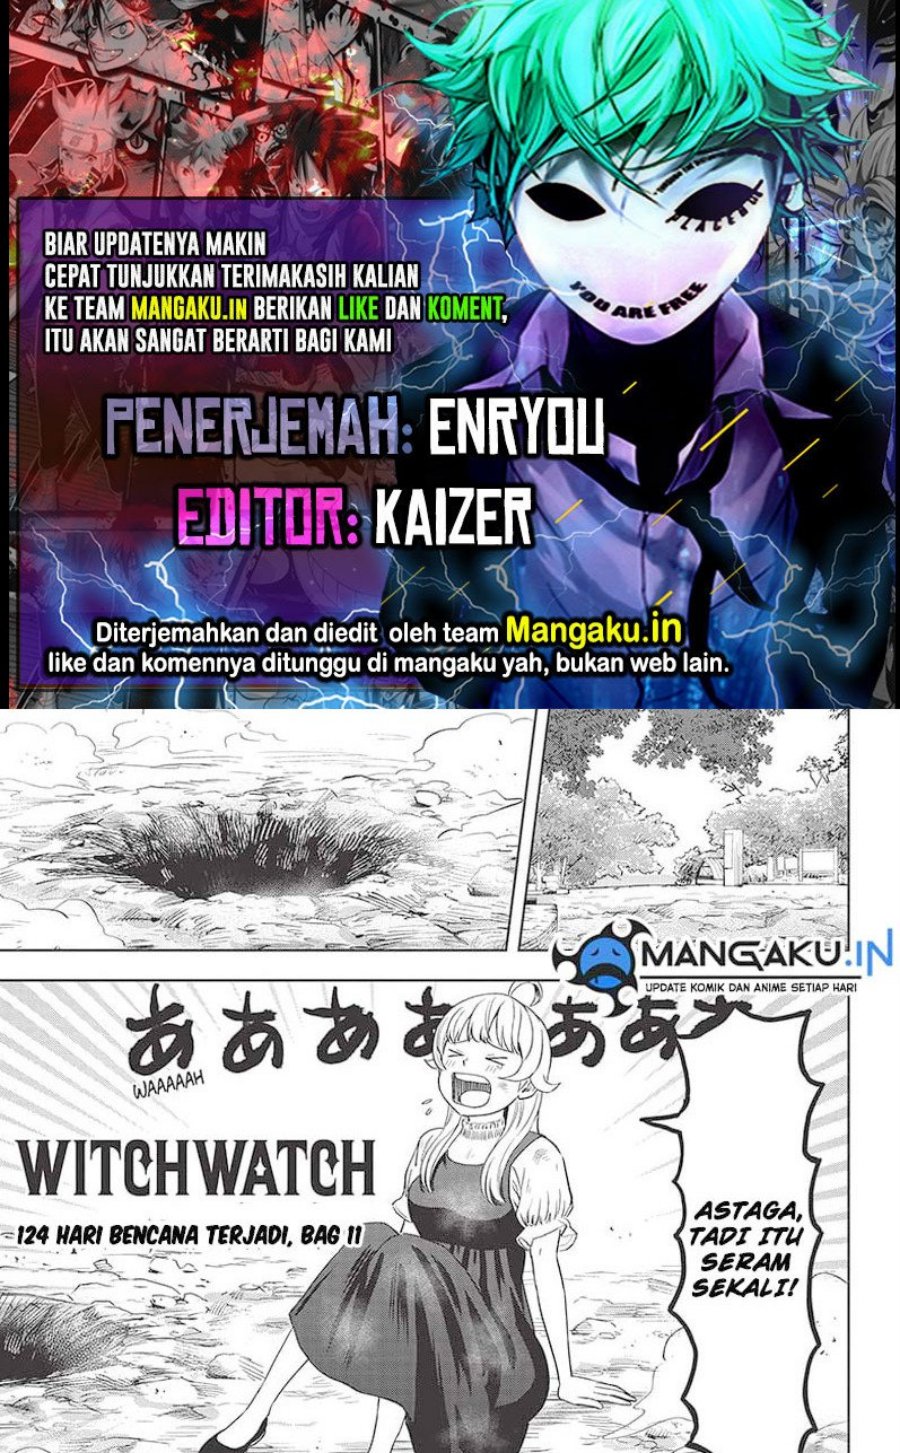 Witch Watch Chapter 124 1